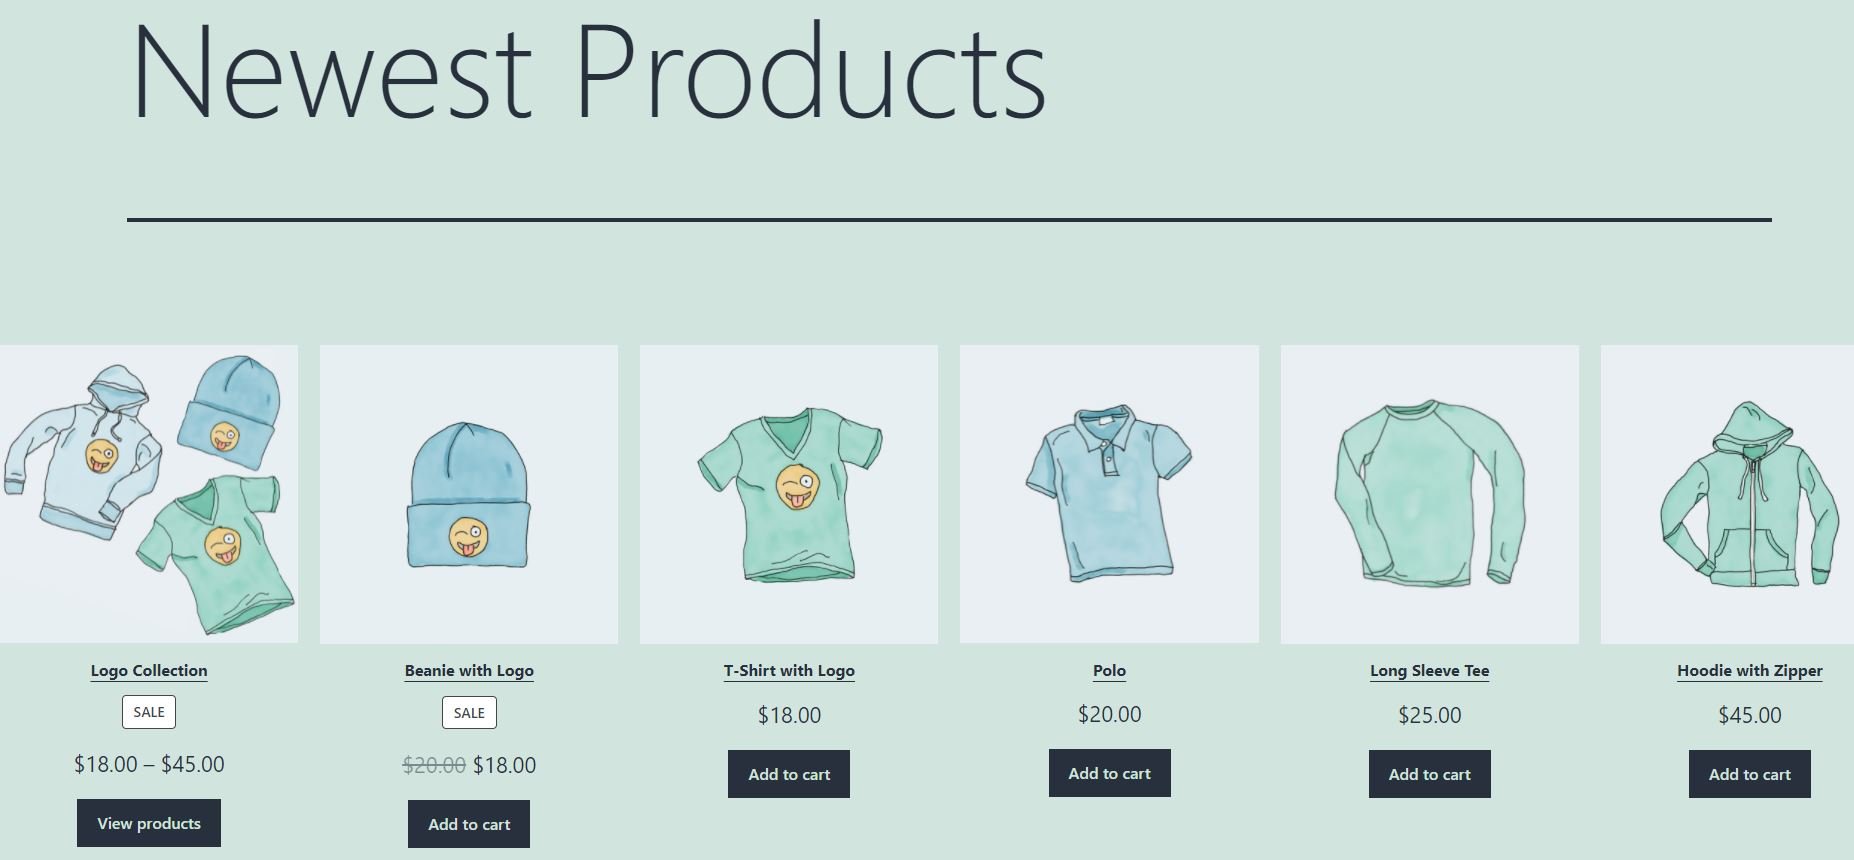 The Newest Products WooCommerce block on the front end